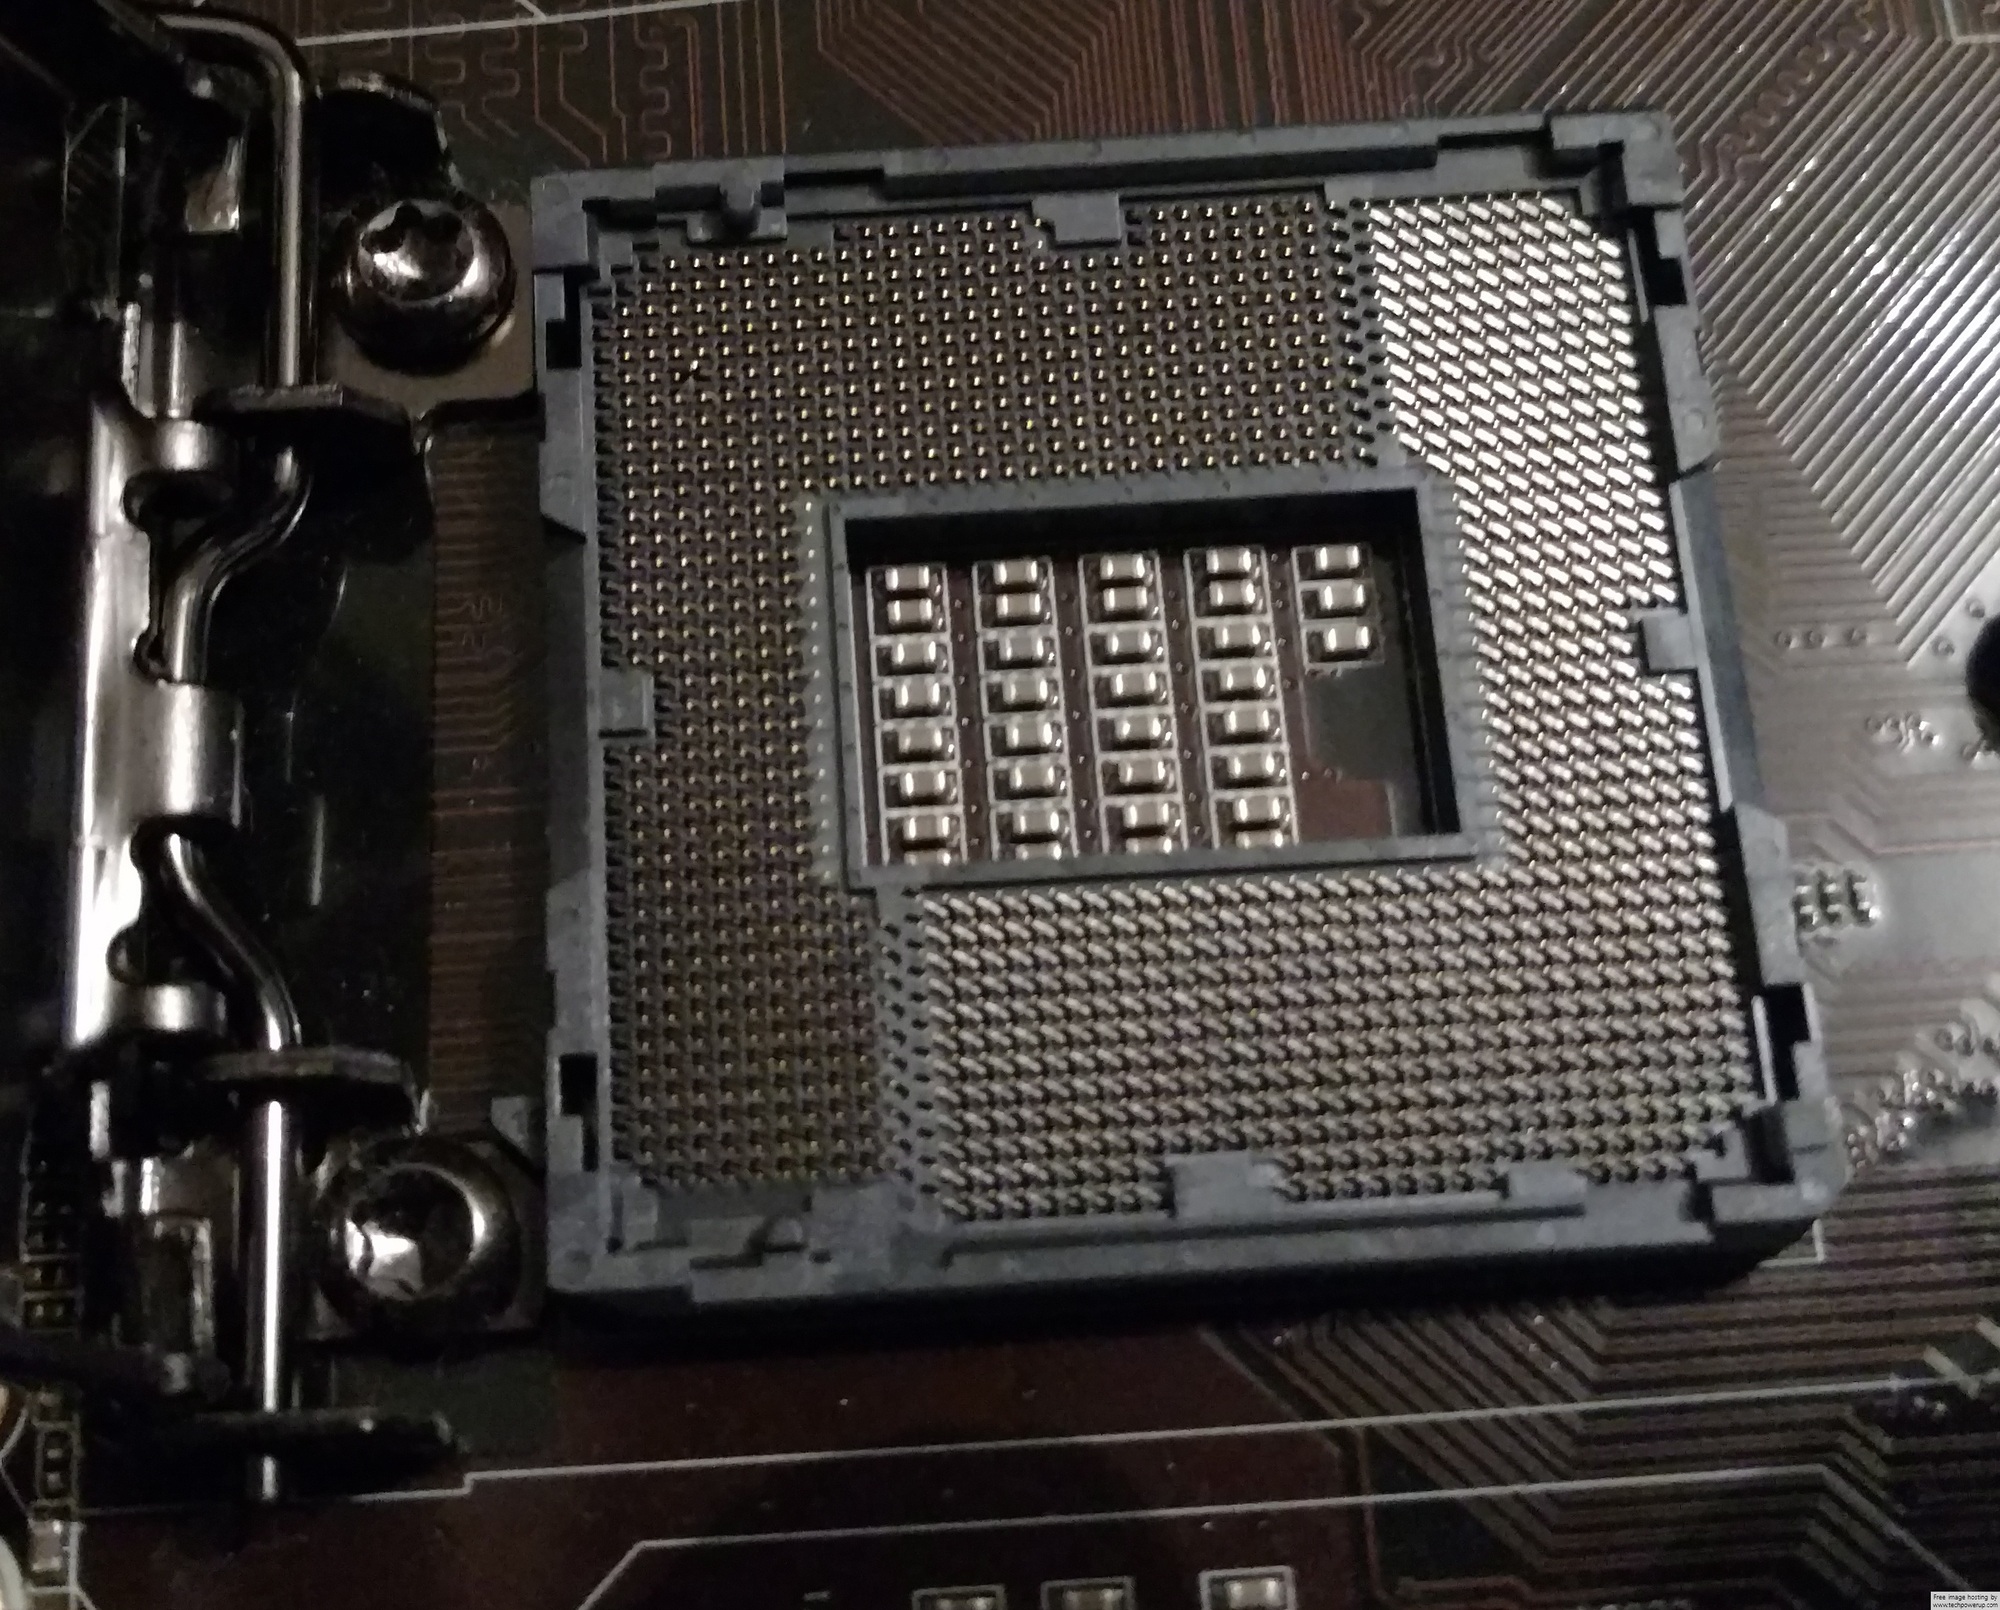 Can a cpu still work if one or two pins are bent. img-20160119-2.jpg